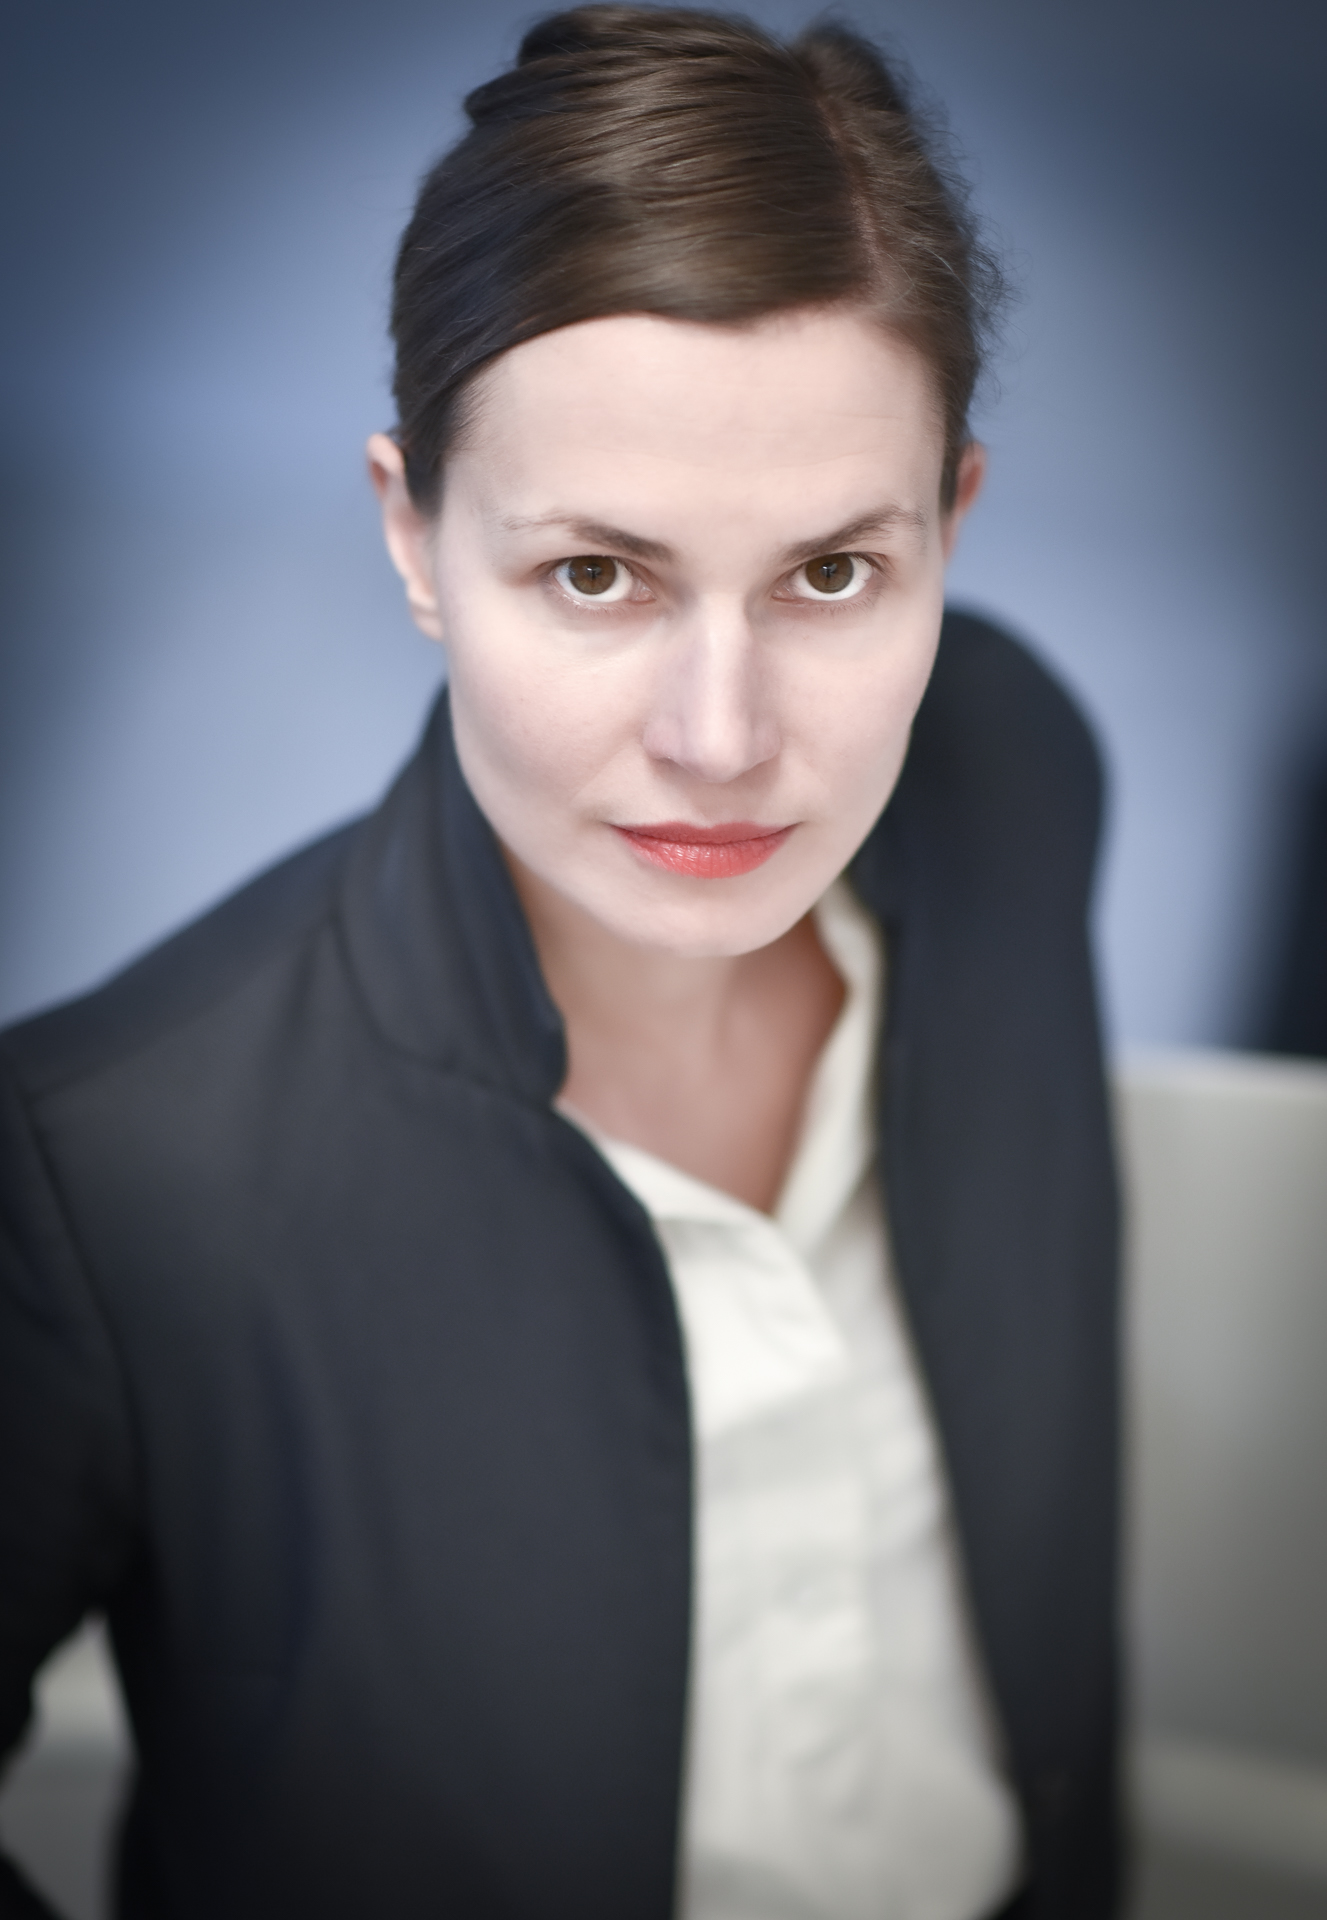 A portrait of Kasia Redzisz, a white person with brown straight hair tied back, wearing a black blazer and a white button-up shirt. The photo is taken slightly from above and she is looking directly to the camera.